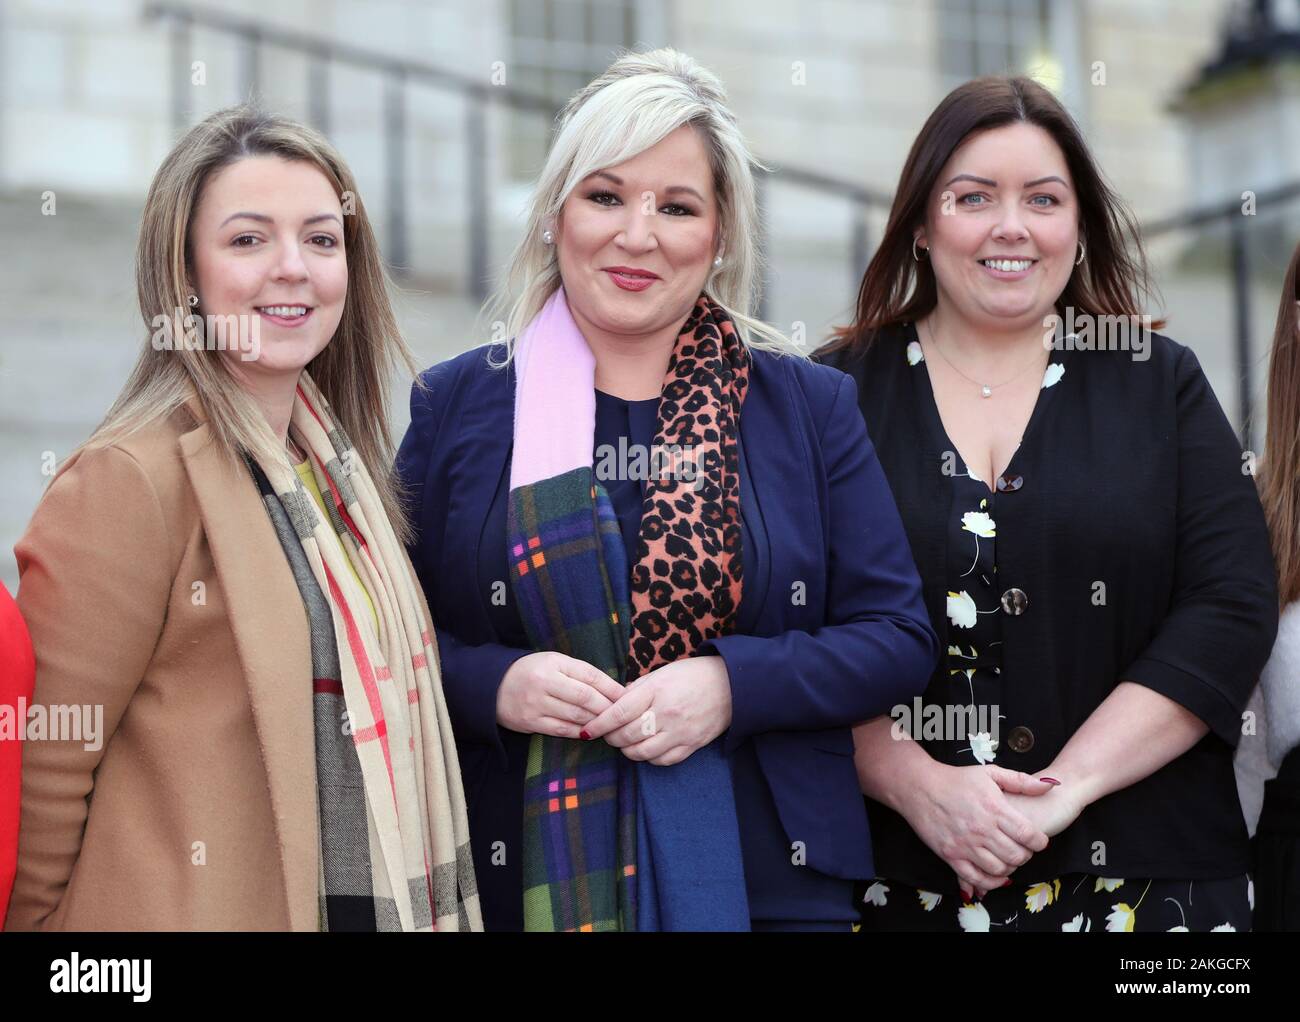 Sinn Fein deputy leader Michelle O'Neill unveils the partys two newly co-opted Members of the Legislative Assembly (MLA), Liz Kimmins (left) and Deirdre Hargey (right) outside the Stormont Parliament buildings in Belfast, as the deadline approaches for the resumption of a power sharing assembly in Northern Ireland. PA Photo Photo. Picture date: Thursday January 9, 2020. See PA story ULSTER Politics . Photo credit should read: Niall Carson/PA Wire Stock Photo